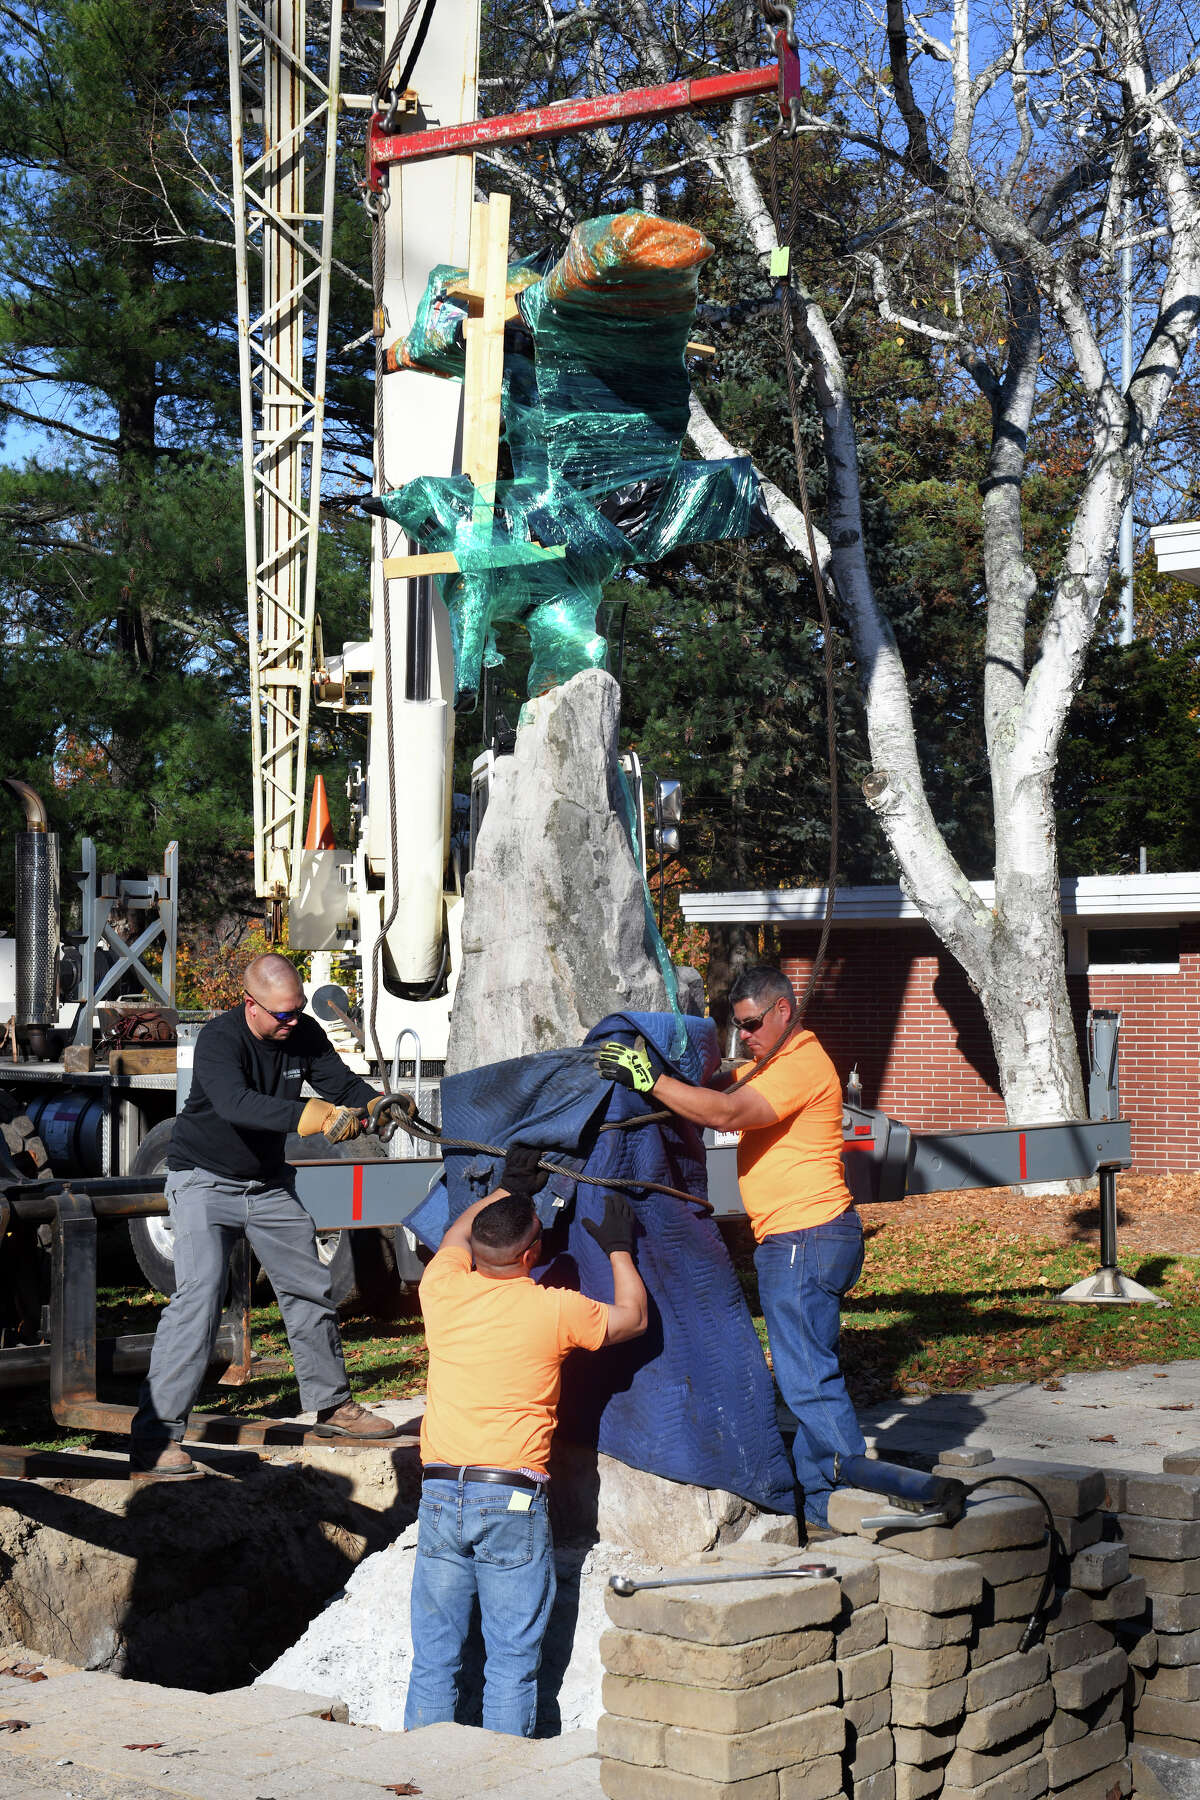 The Eagle monument is moved from the spot where it has stood for generations in front the old War Memorial at Riverview Park, in Shelton, Conn. Nov. 7, 2022. The monument is being moved to Veterans Memorial Park on Canal St.